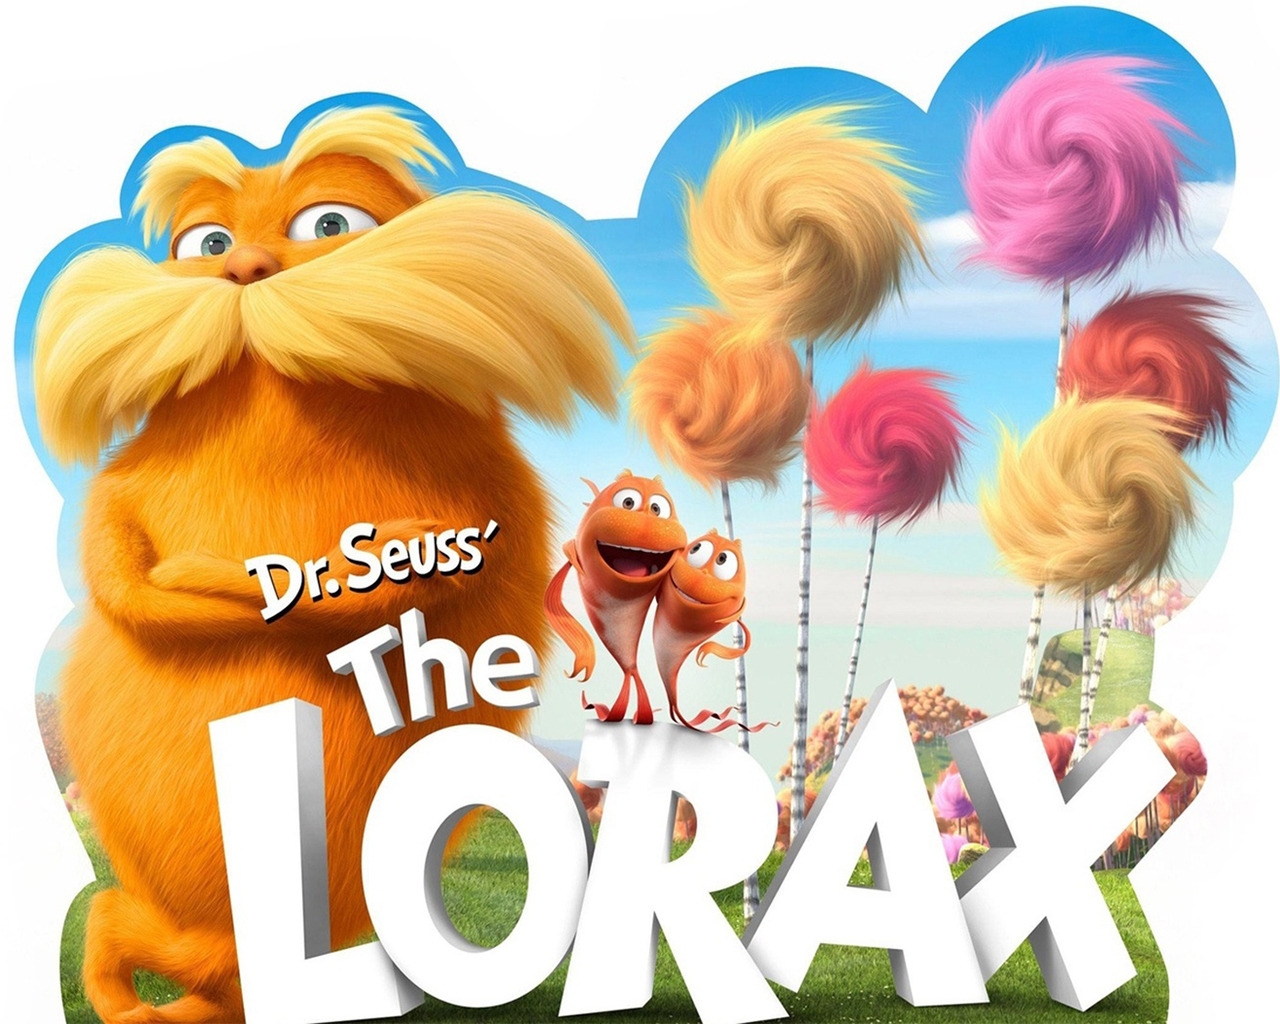 The Lorax for 1280 x 1024 resolution